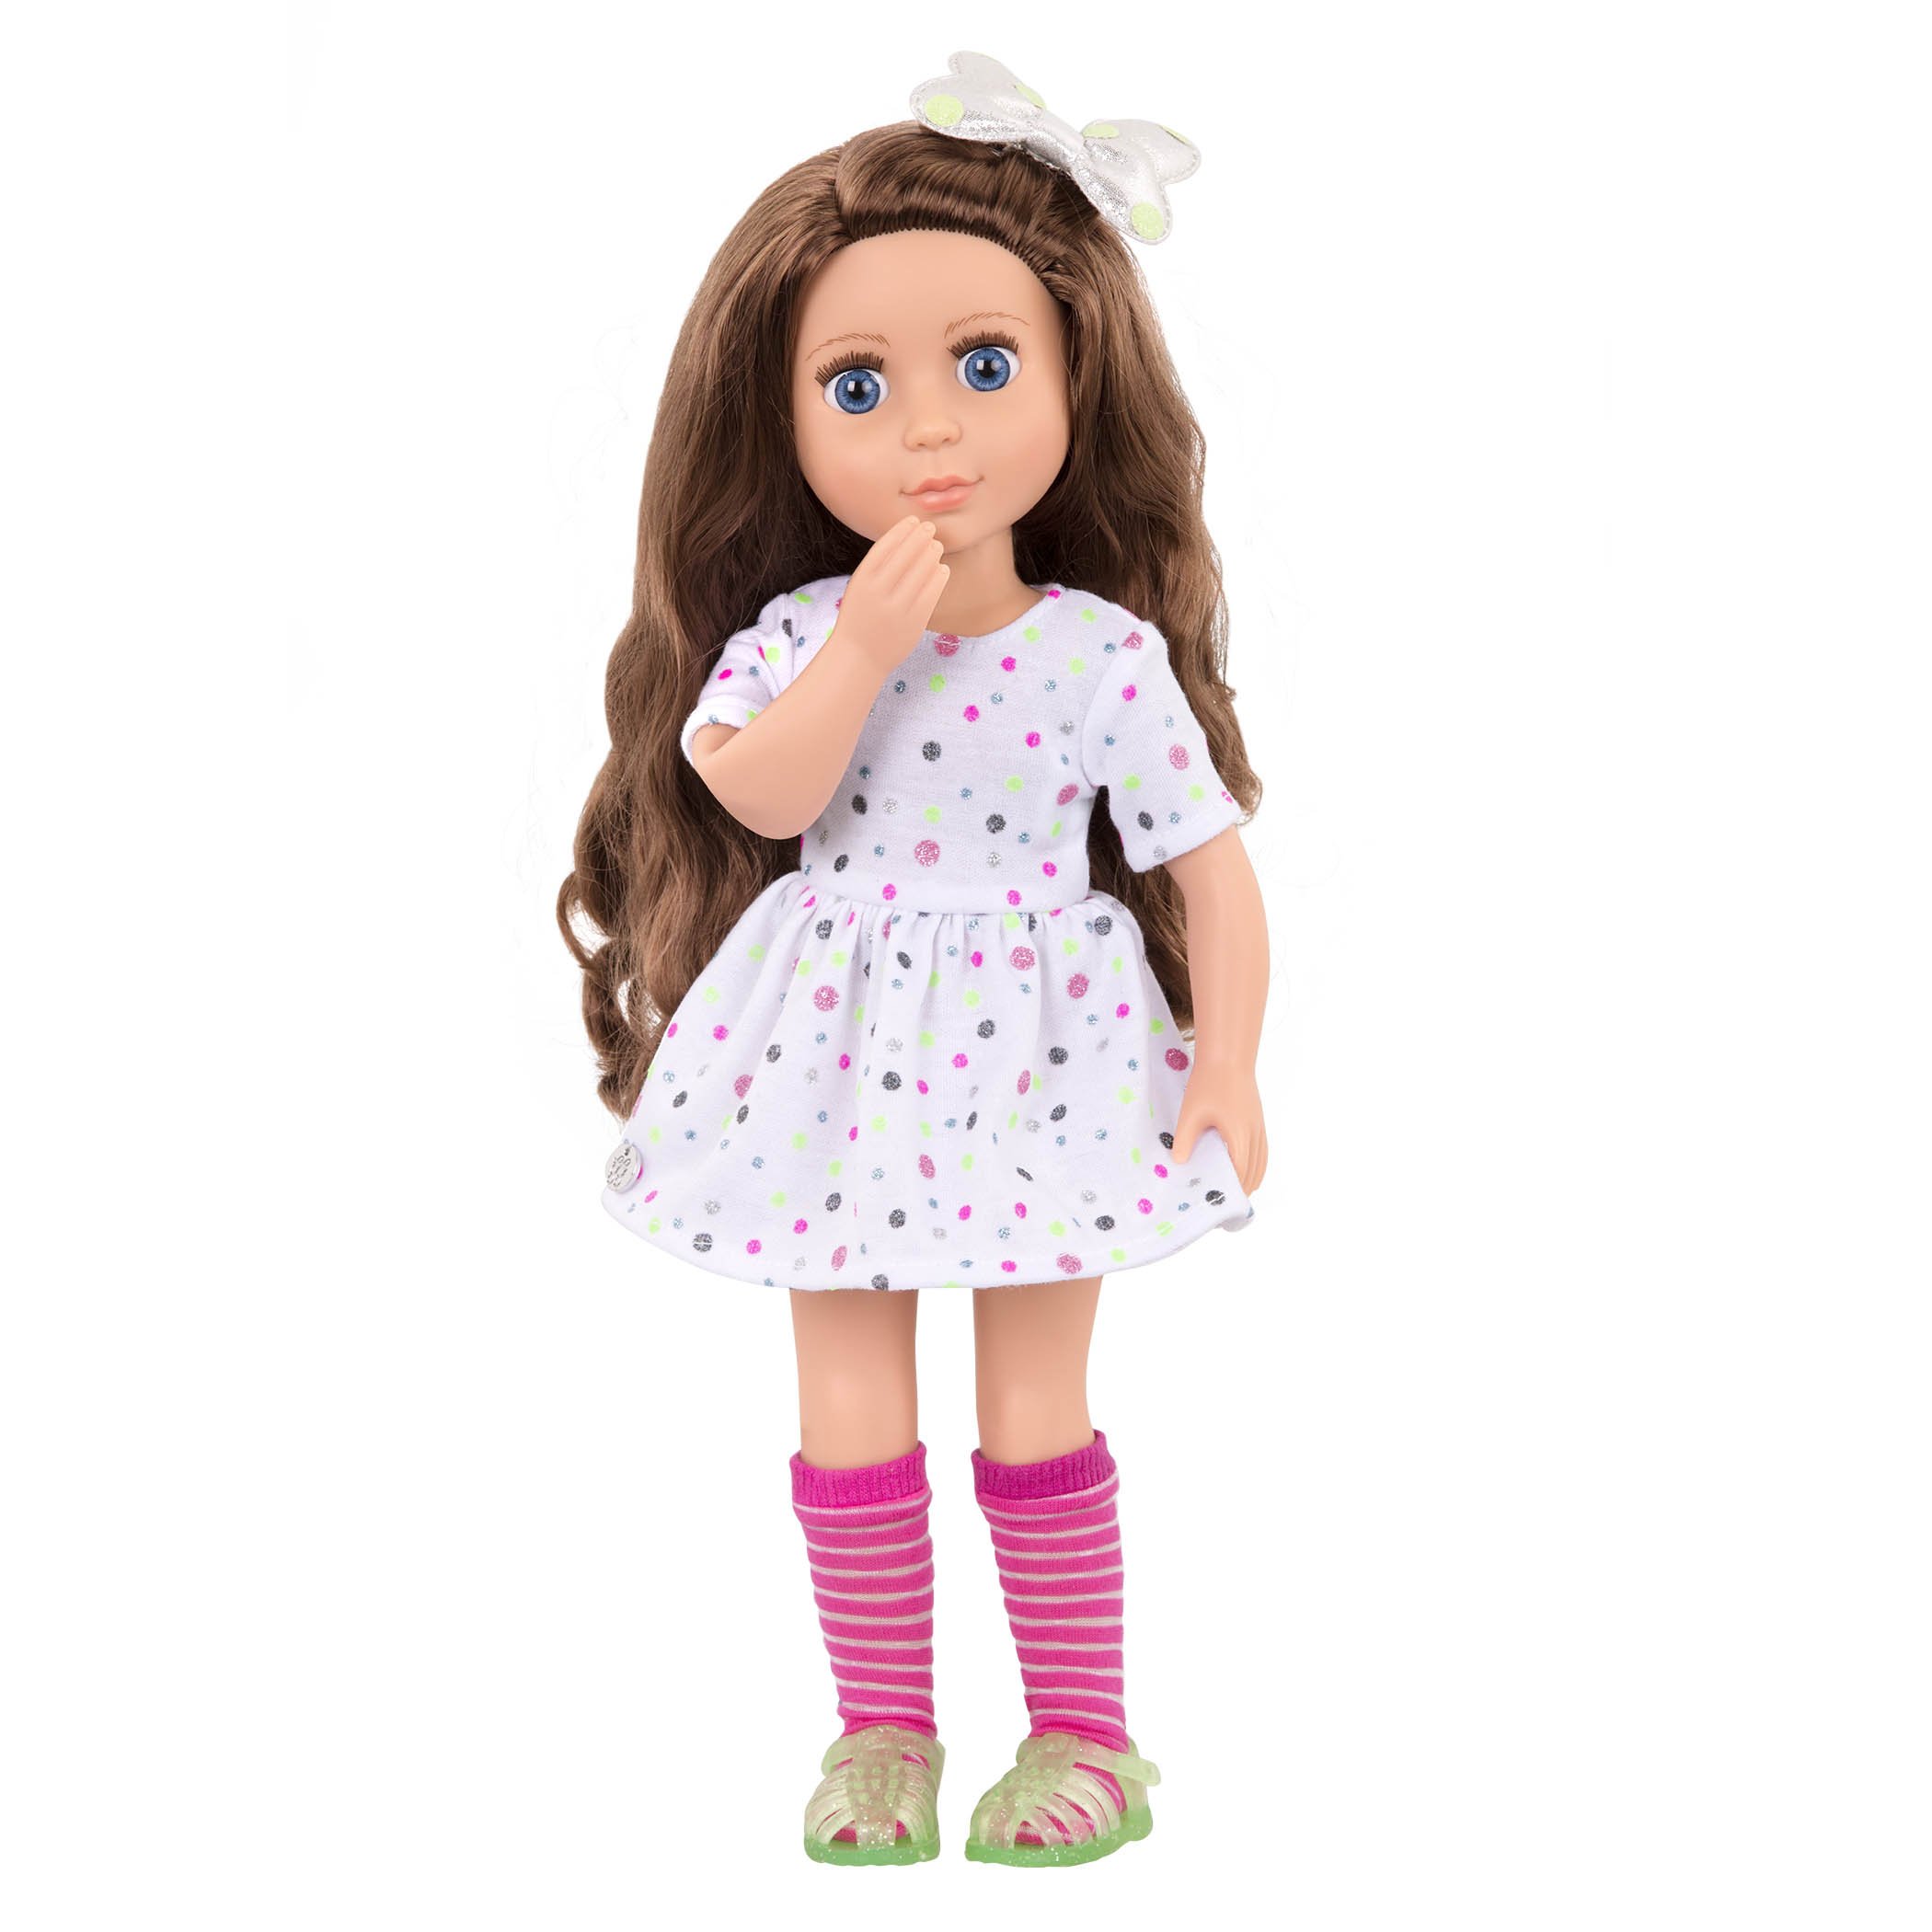 Glitter Girls - Bubbly & Shiny Outfit -14-inch Doll Clothes - Toys, Clothes & Accessories For Girls 3-Year-Old & Up (GG50109Z)